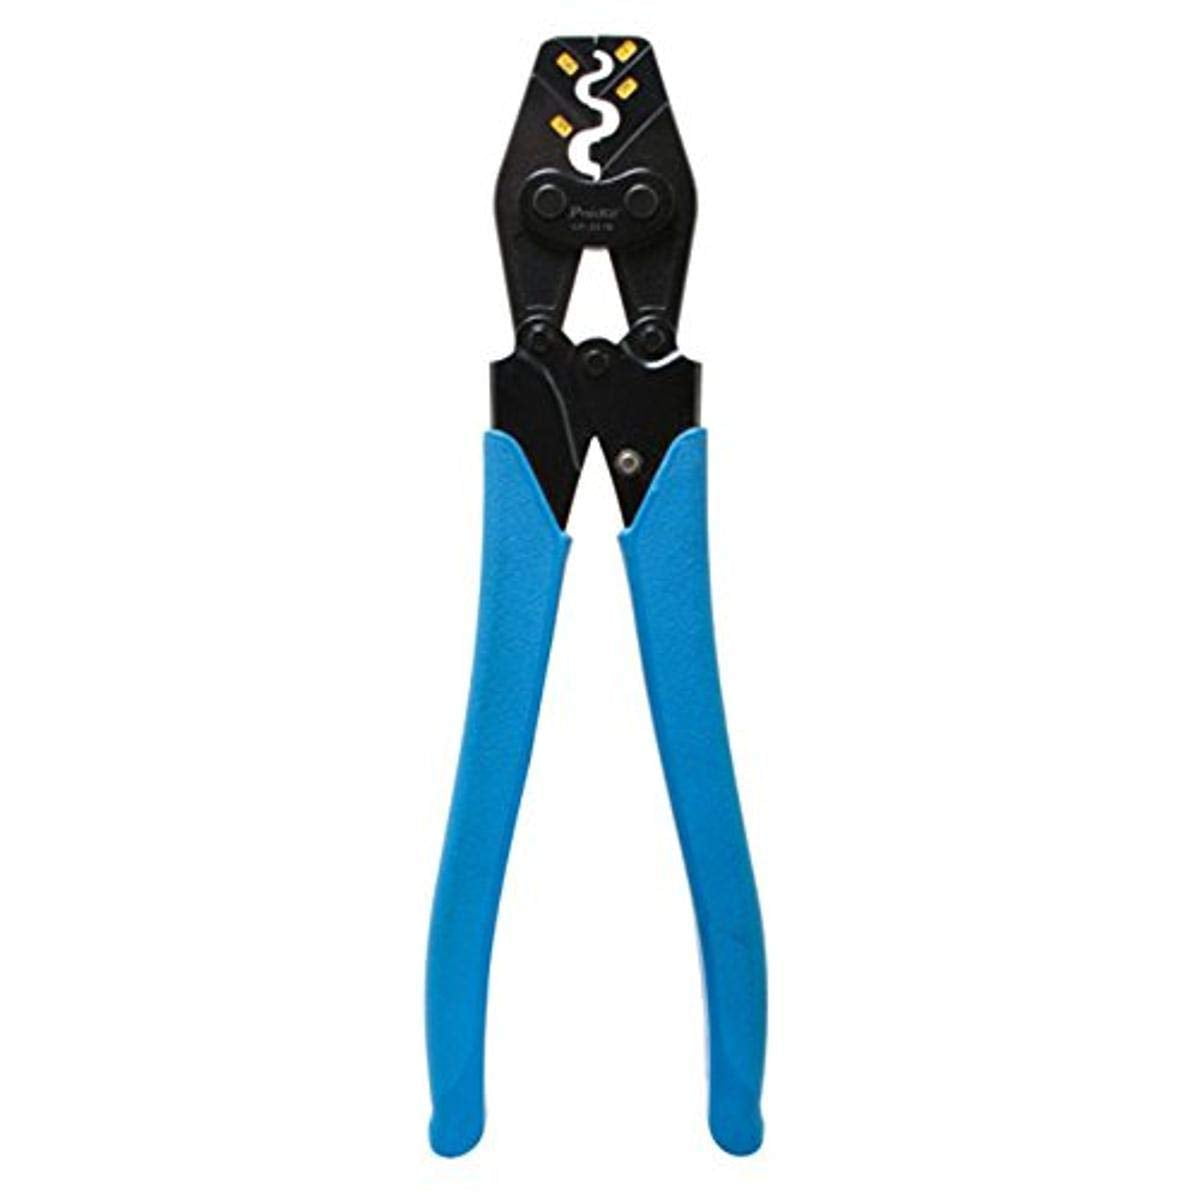 AWG20-10 Insulated and Non-Insulated cable end-sleeves Ratchet Crimping Plier 